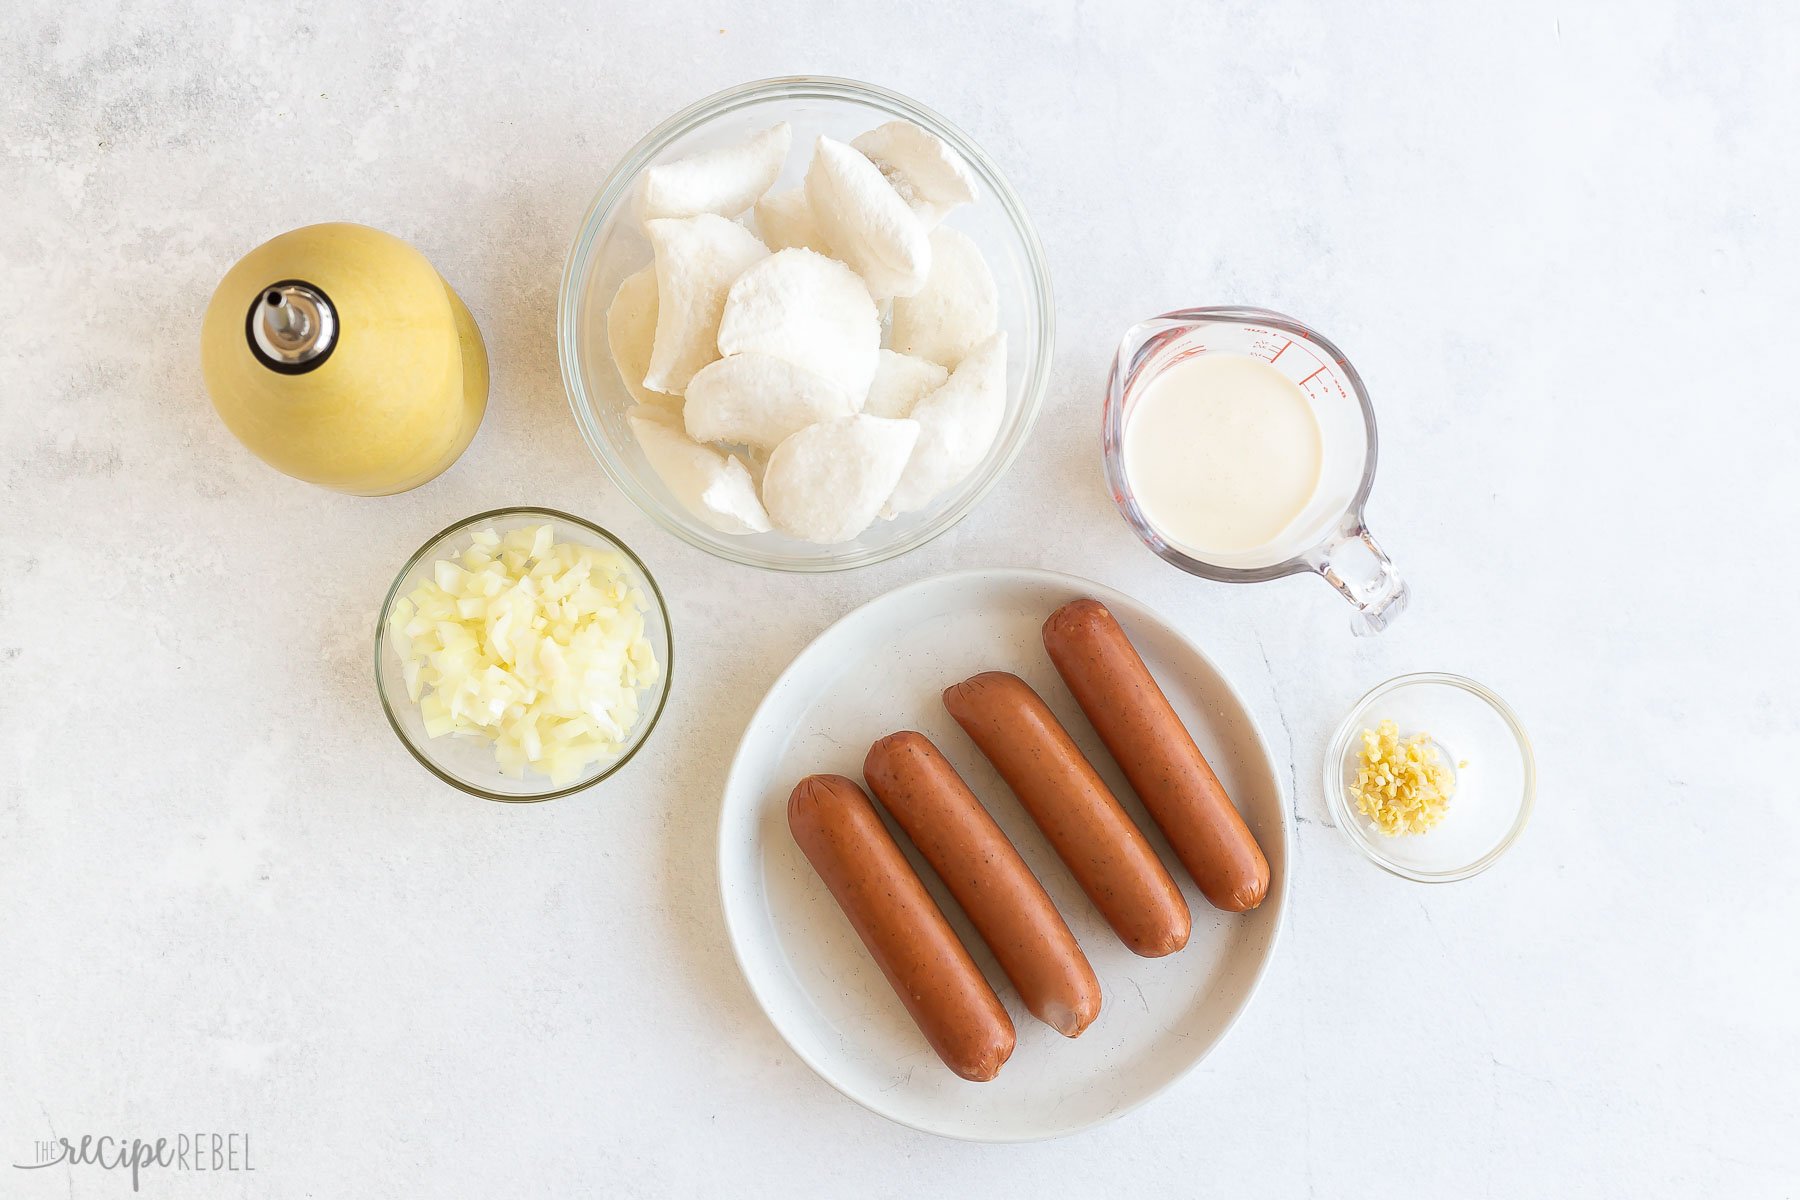 ingredients needed for perogies and sausage skillet.